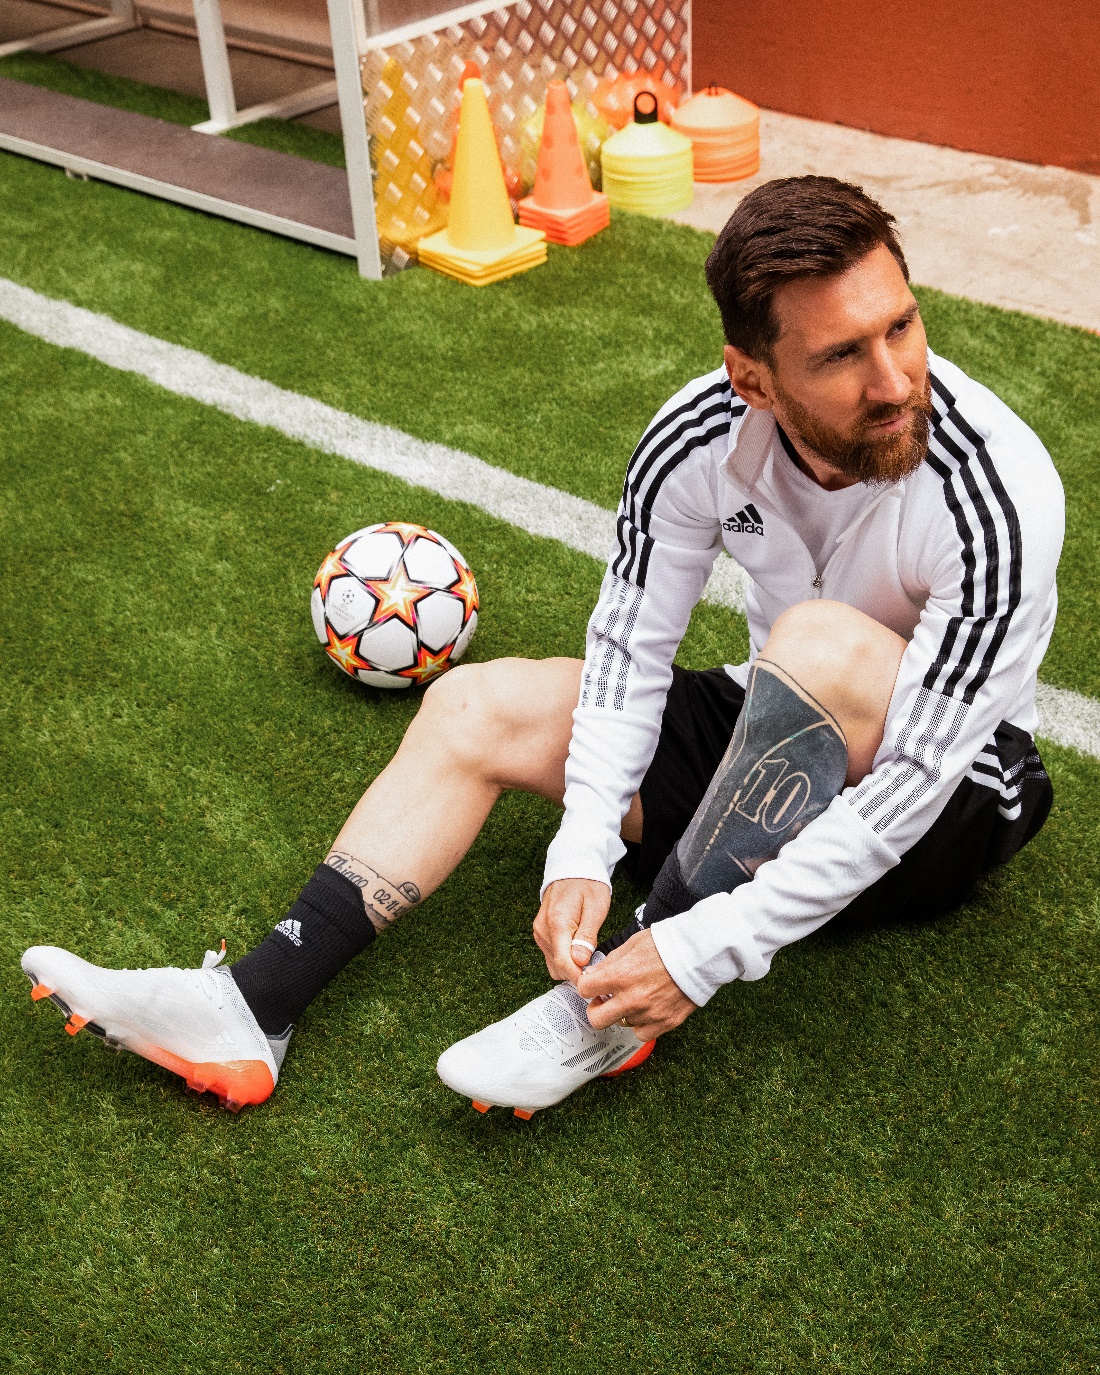 A person kneeling on the grass with a football ball

Description automatically generated with low confidence